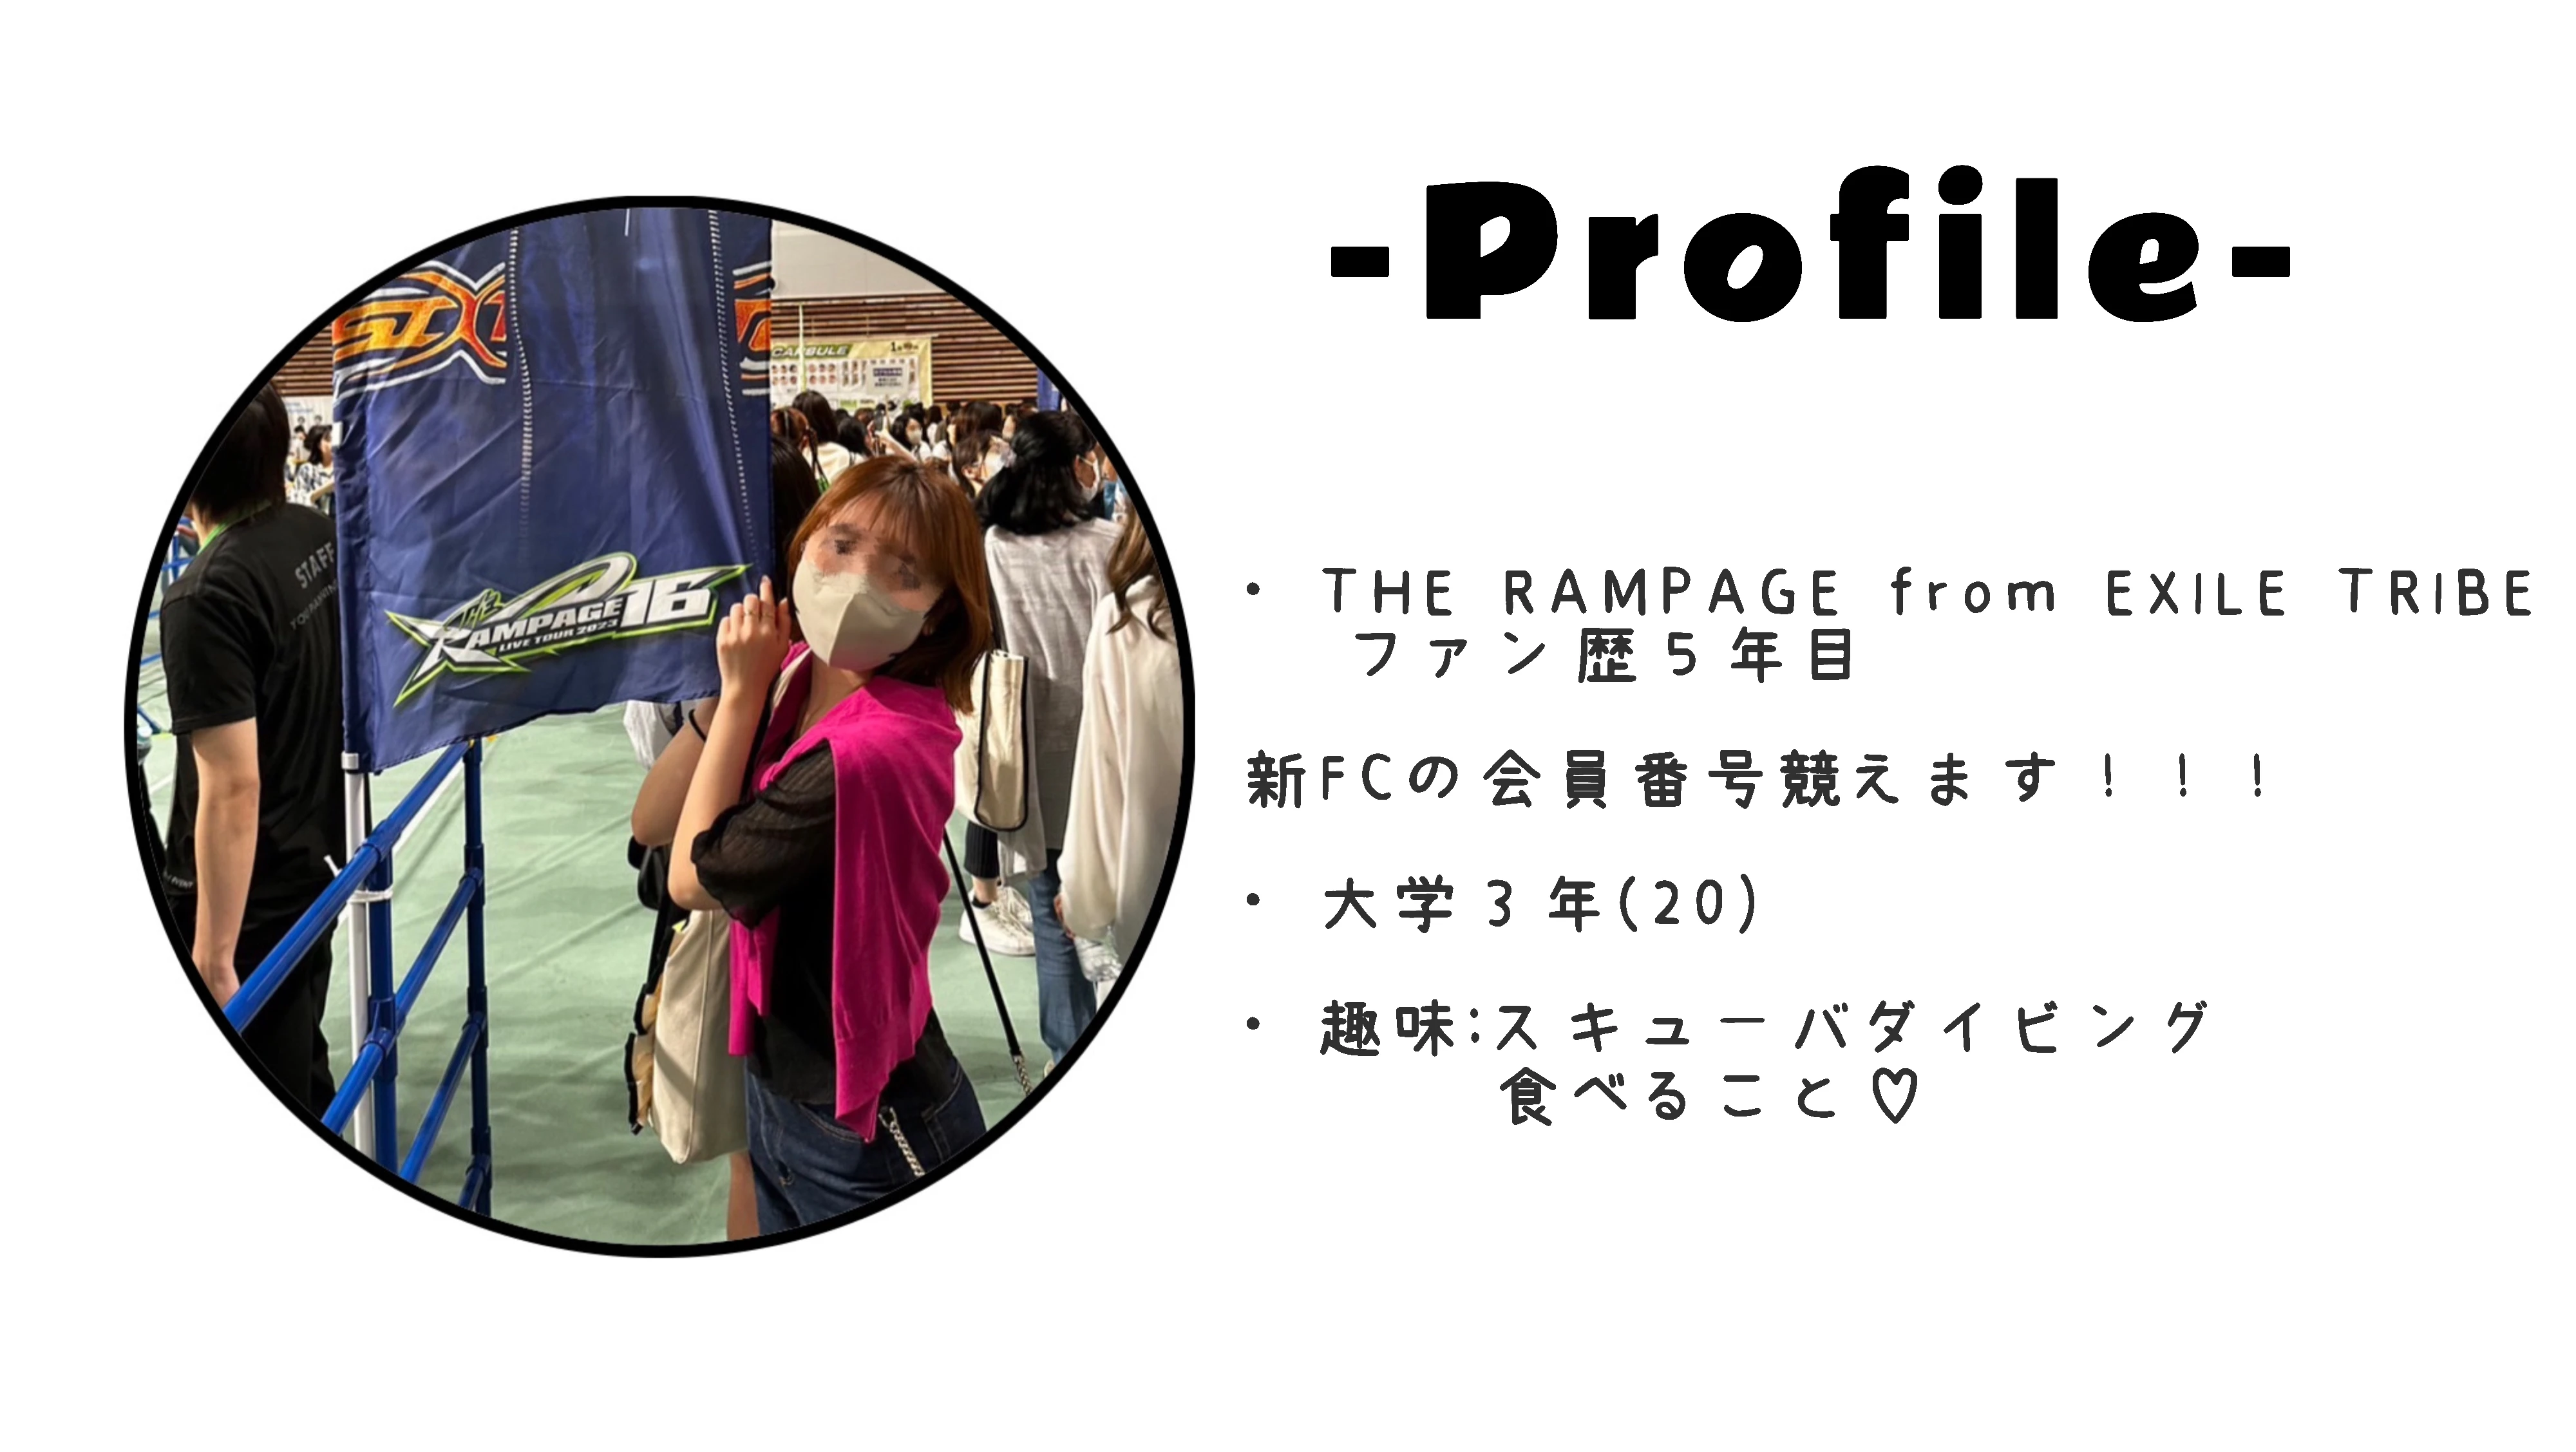 THE RAMPAGE from EXILE TRIBEファン　推し活